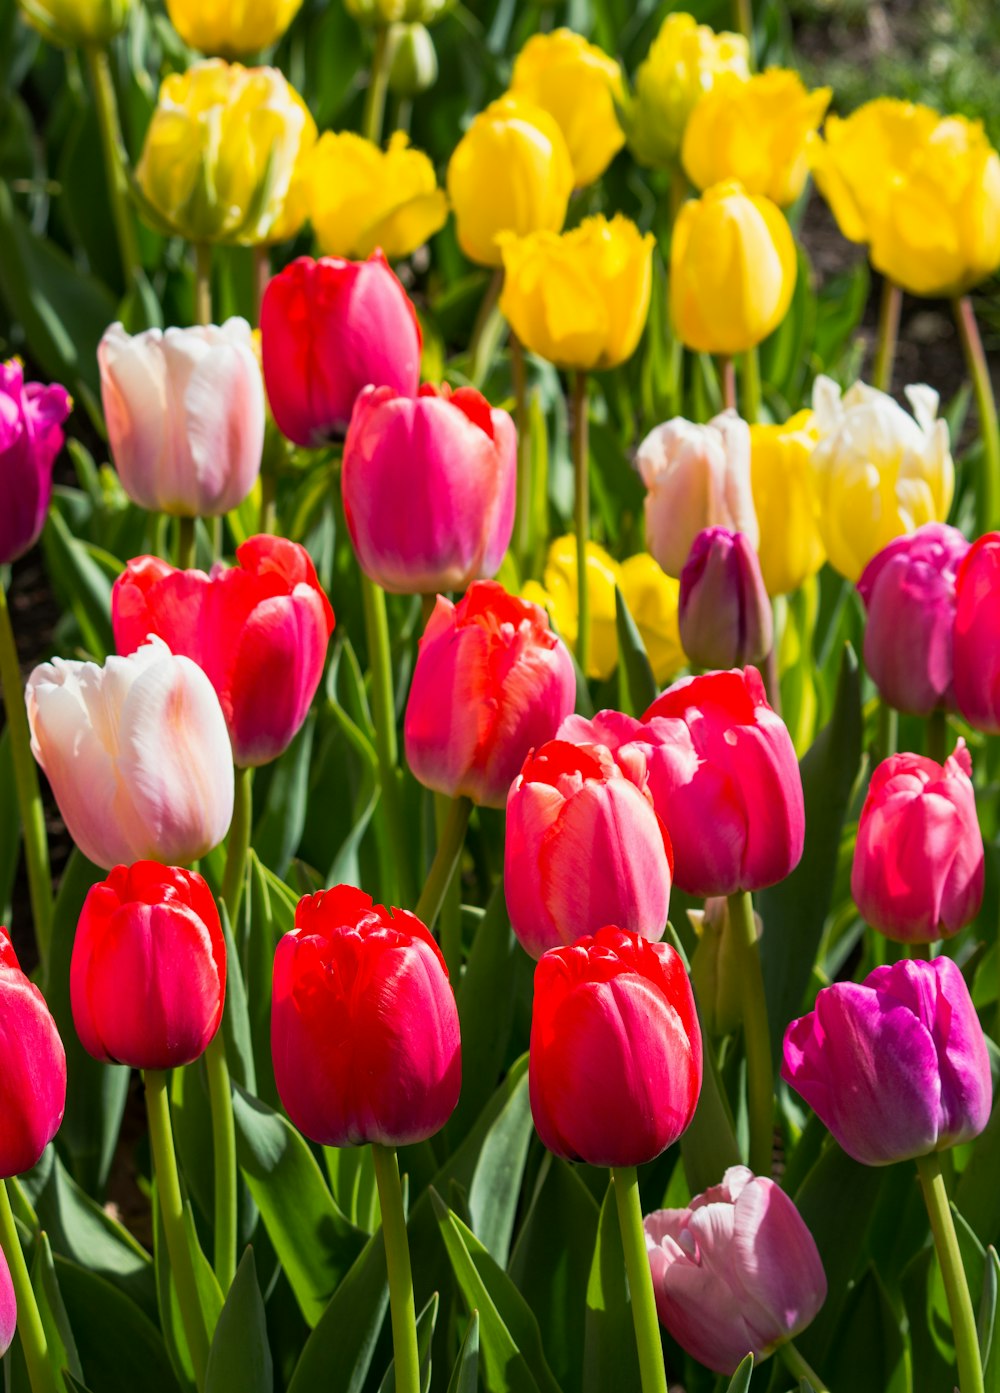 red and yellow tulips in bloom during daytime